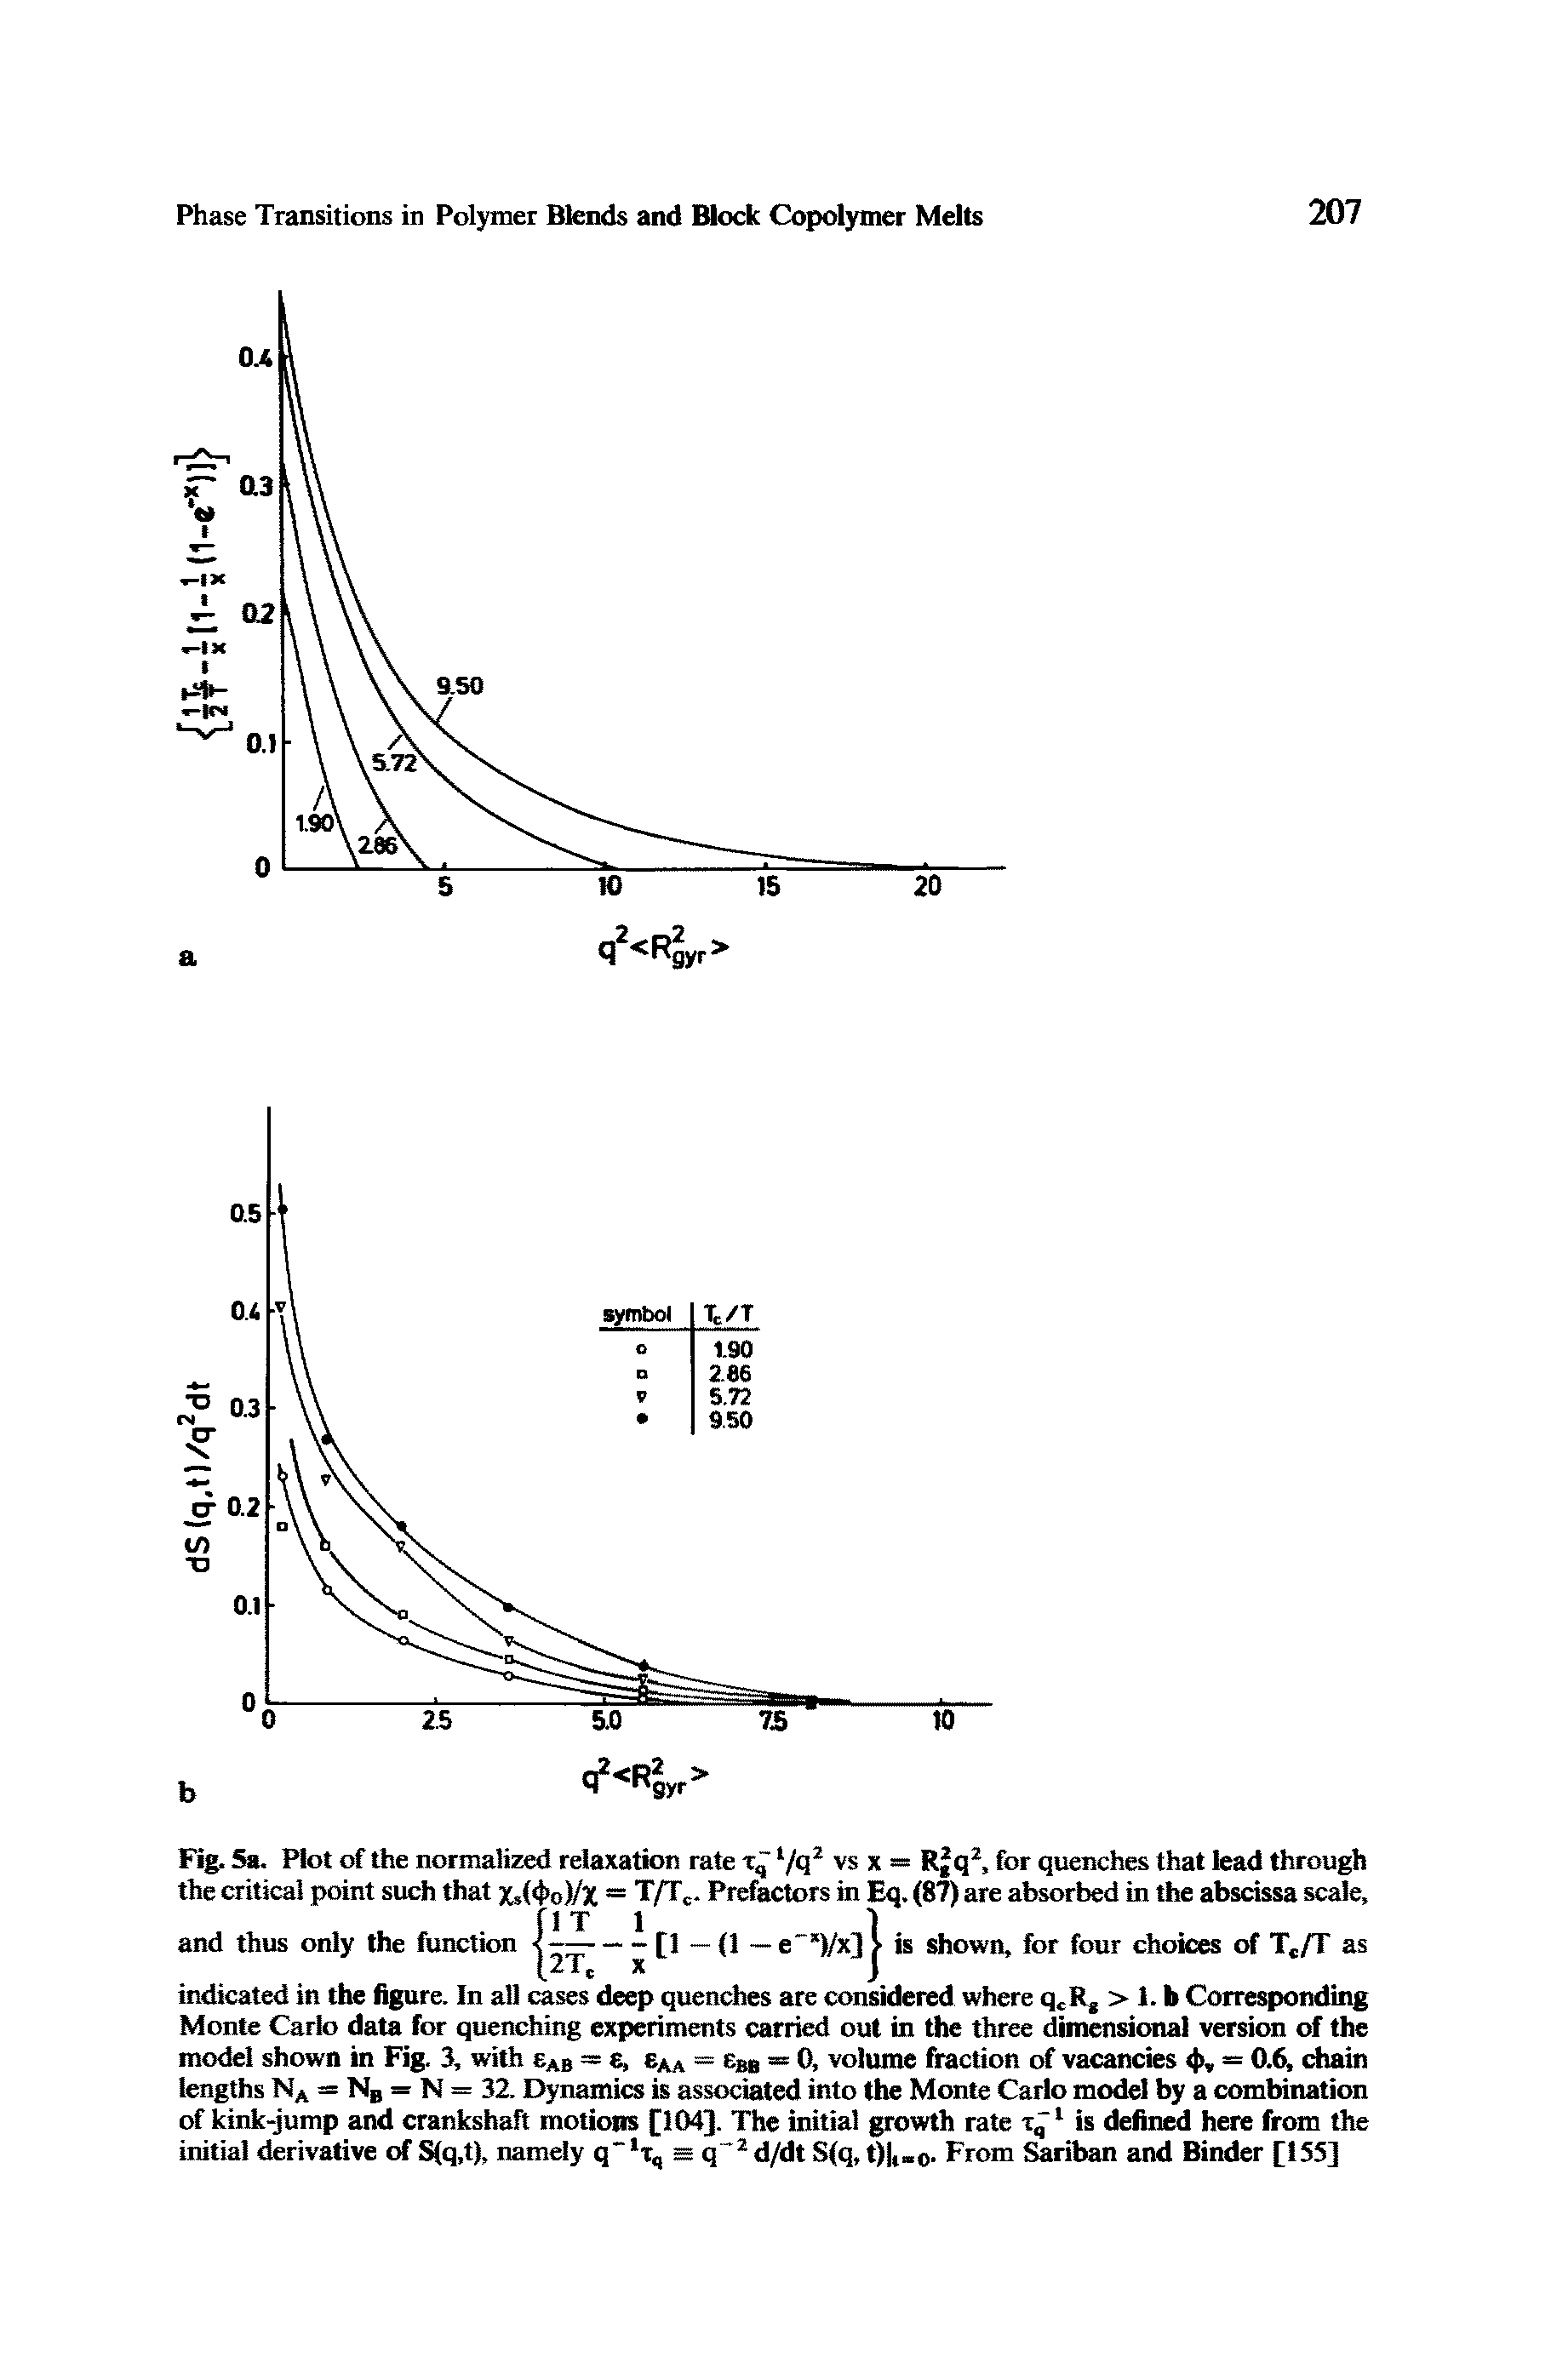 Fig. 5a. Plot of the normalized relaxation rate l/q2 vs x = Rjq2, for quenches that lead through the critical point such that x (4>o)/Z = T/Tc. Prefactors in Eq. (87) are absorbed in the abscissa scale, IT 1 1...